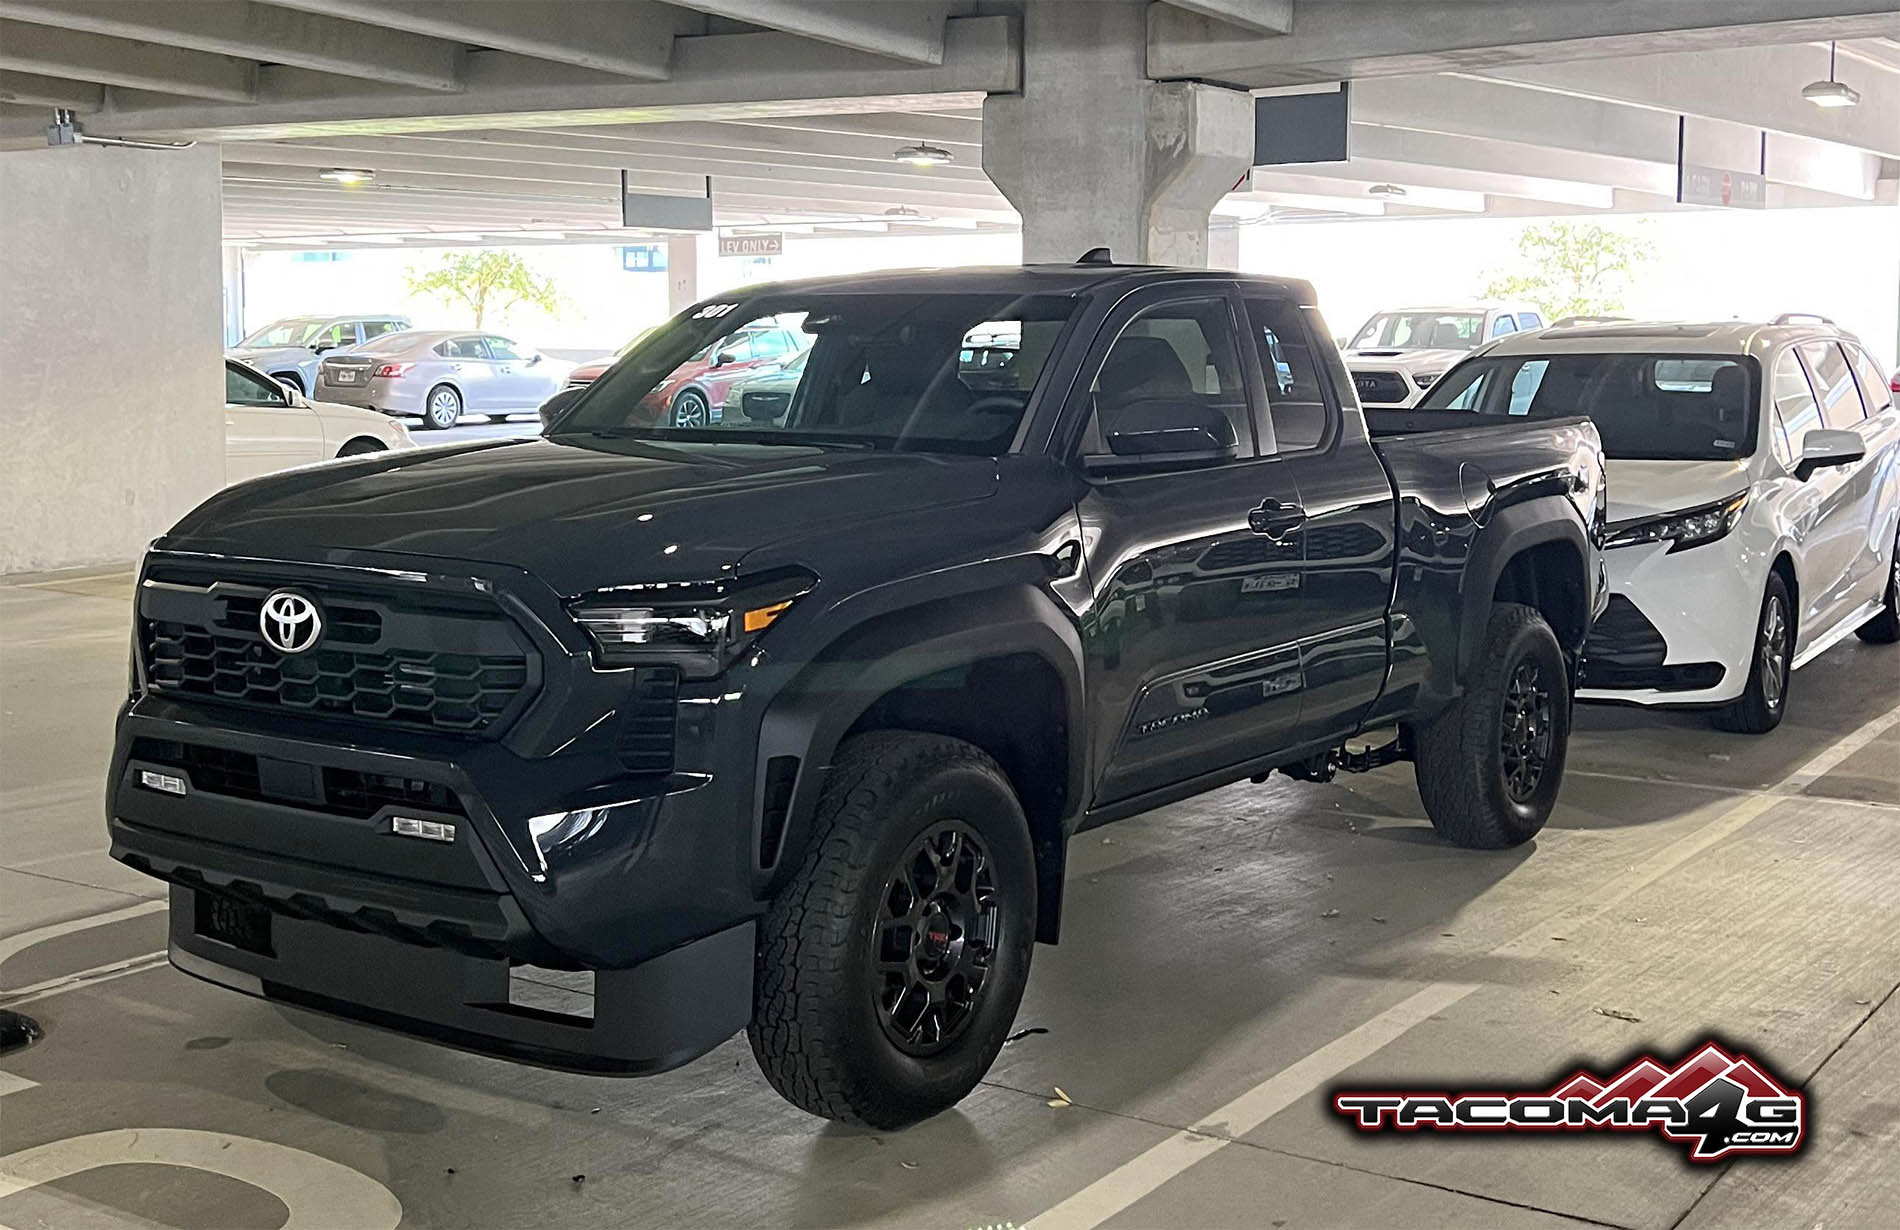 2024 Tacoma Spotted! PreRunner 2024 Tacoma first public sighting & vs 3rd gen! 2024 Tacoma Prerunner vs 3rd gen Tacoma